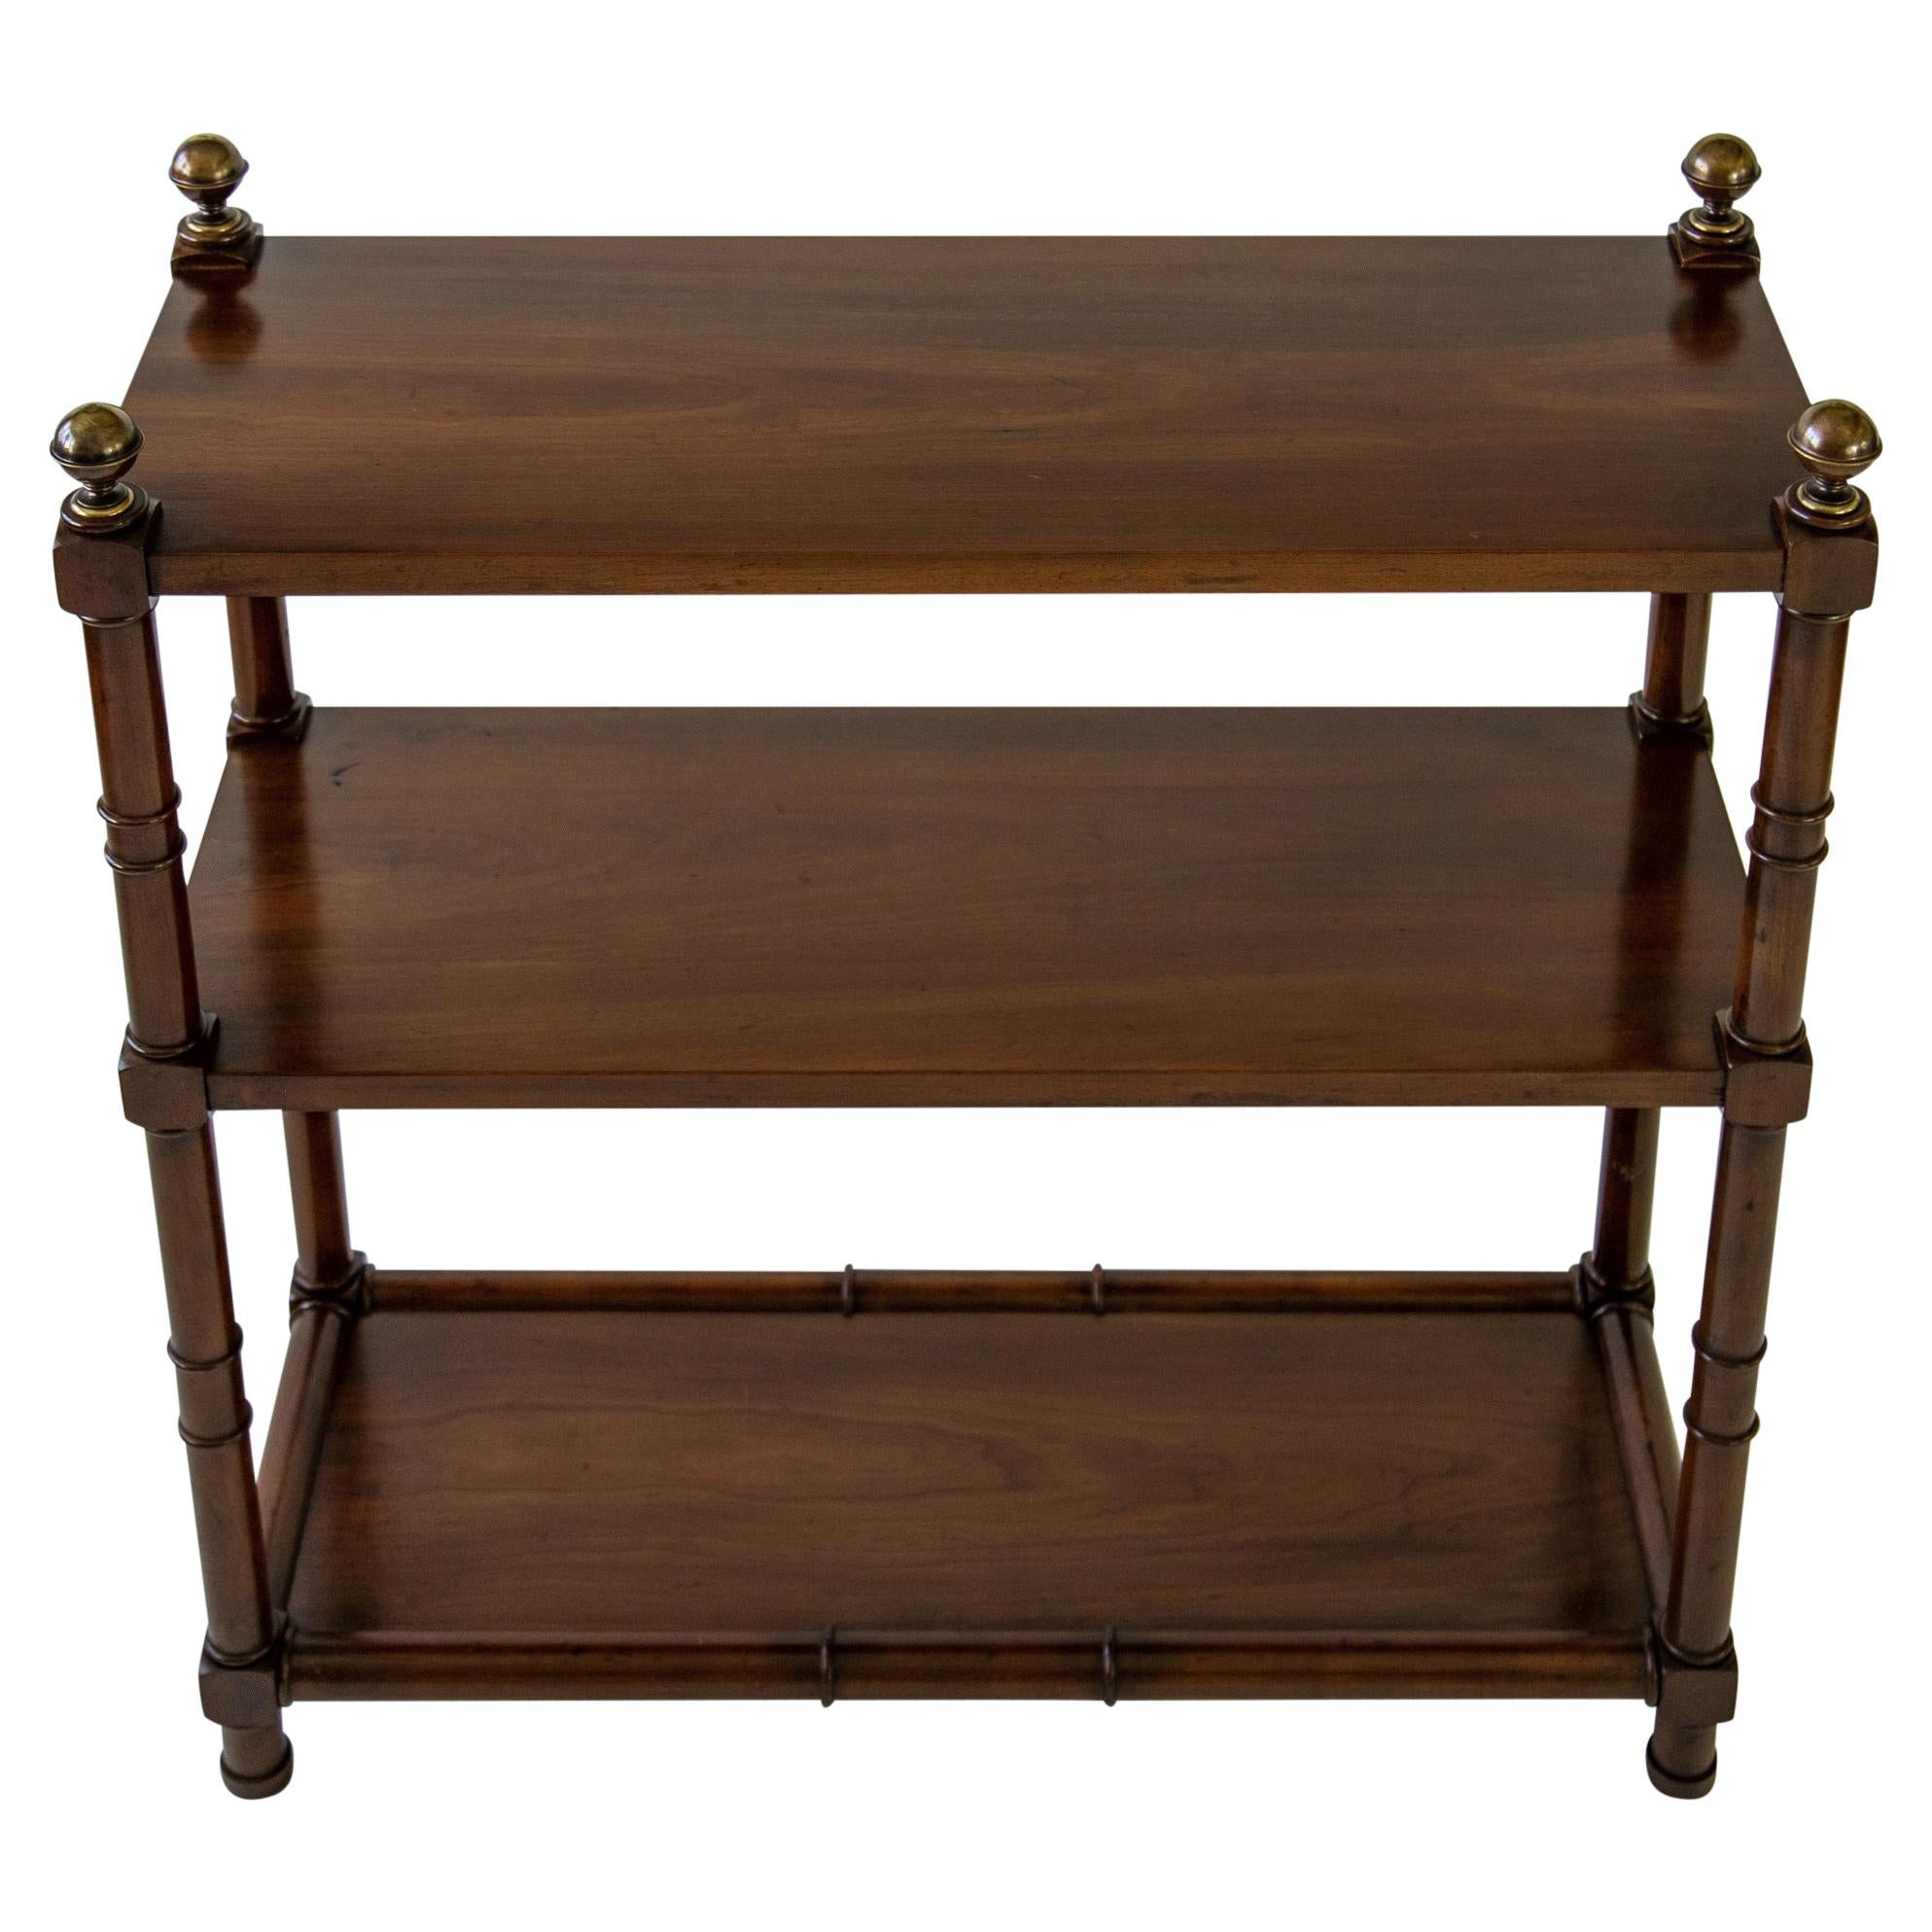 Vintage walnut open three-shelf bookcase or display étagère with bamboo-style detail and brass ball finials. Measures: Bottom shelf 4